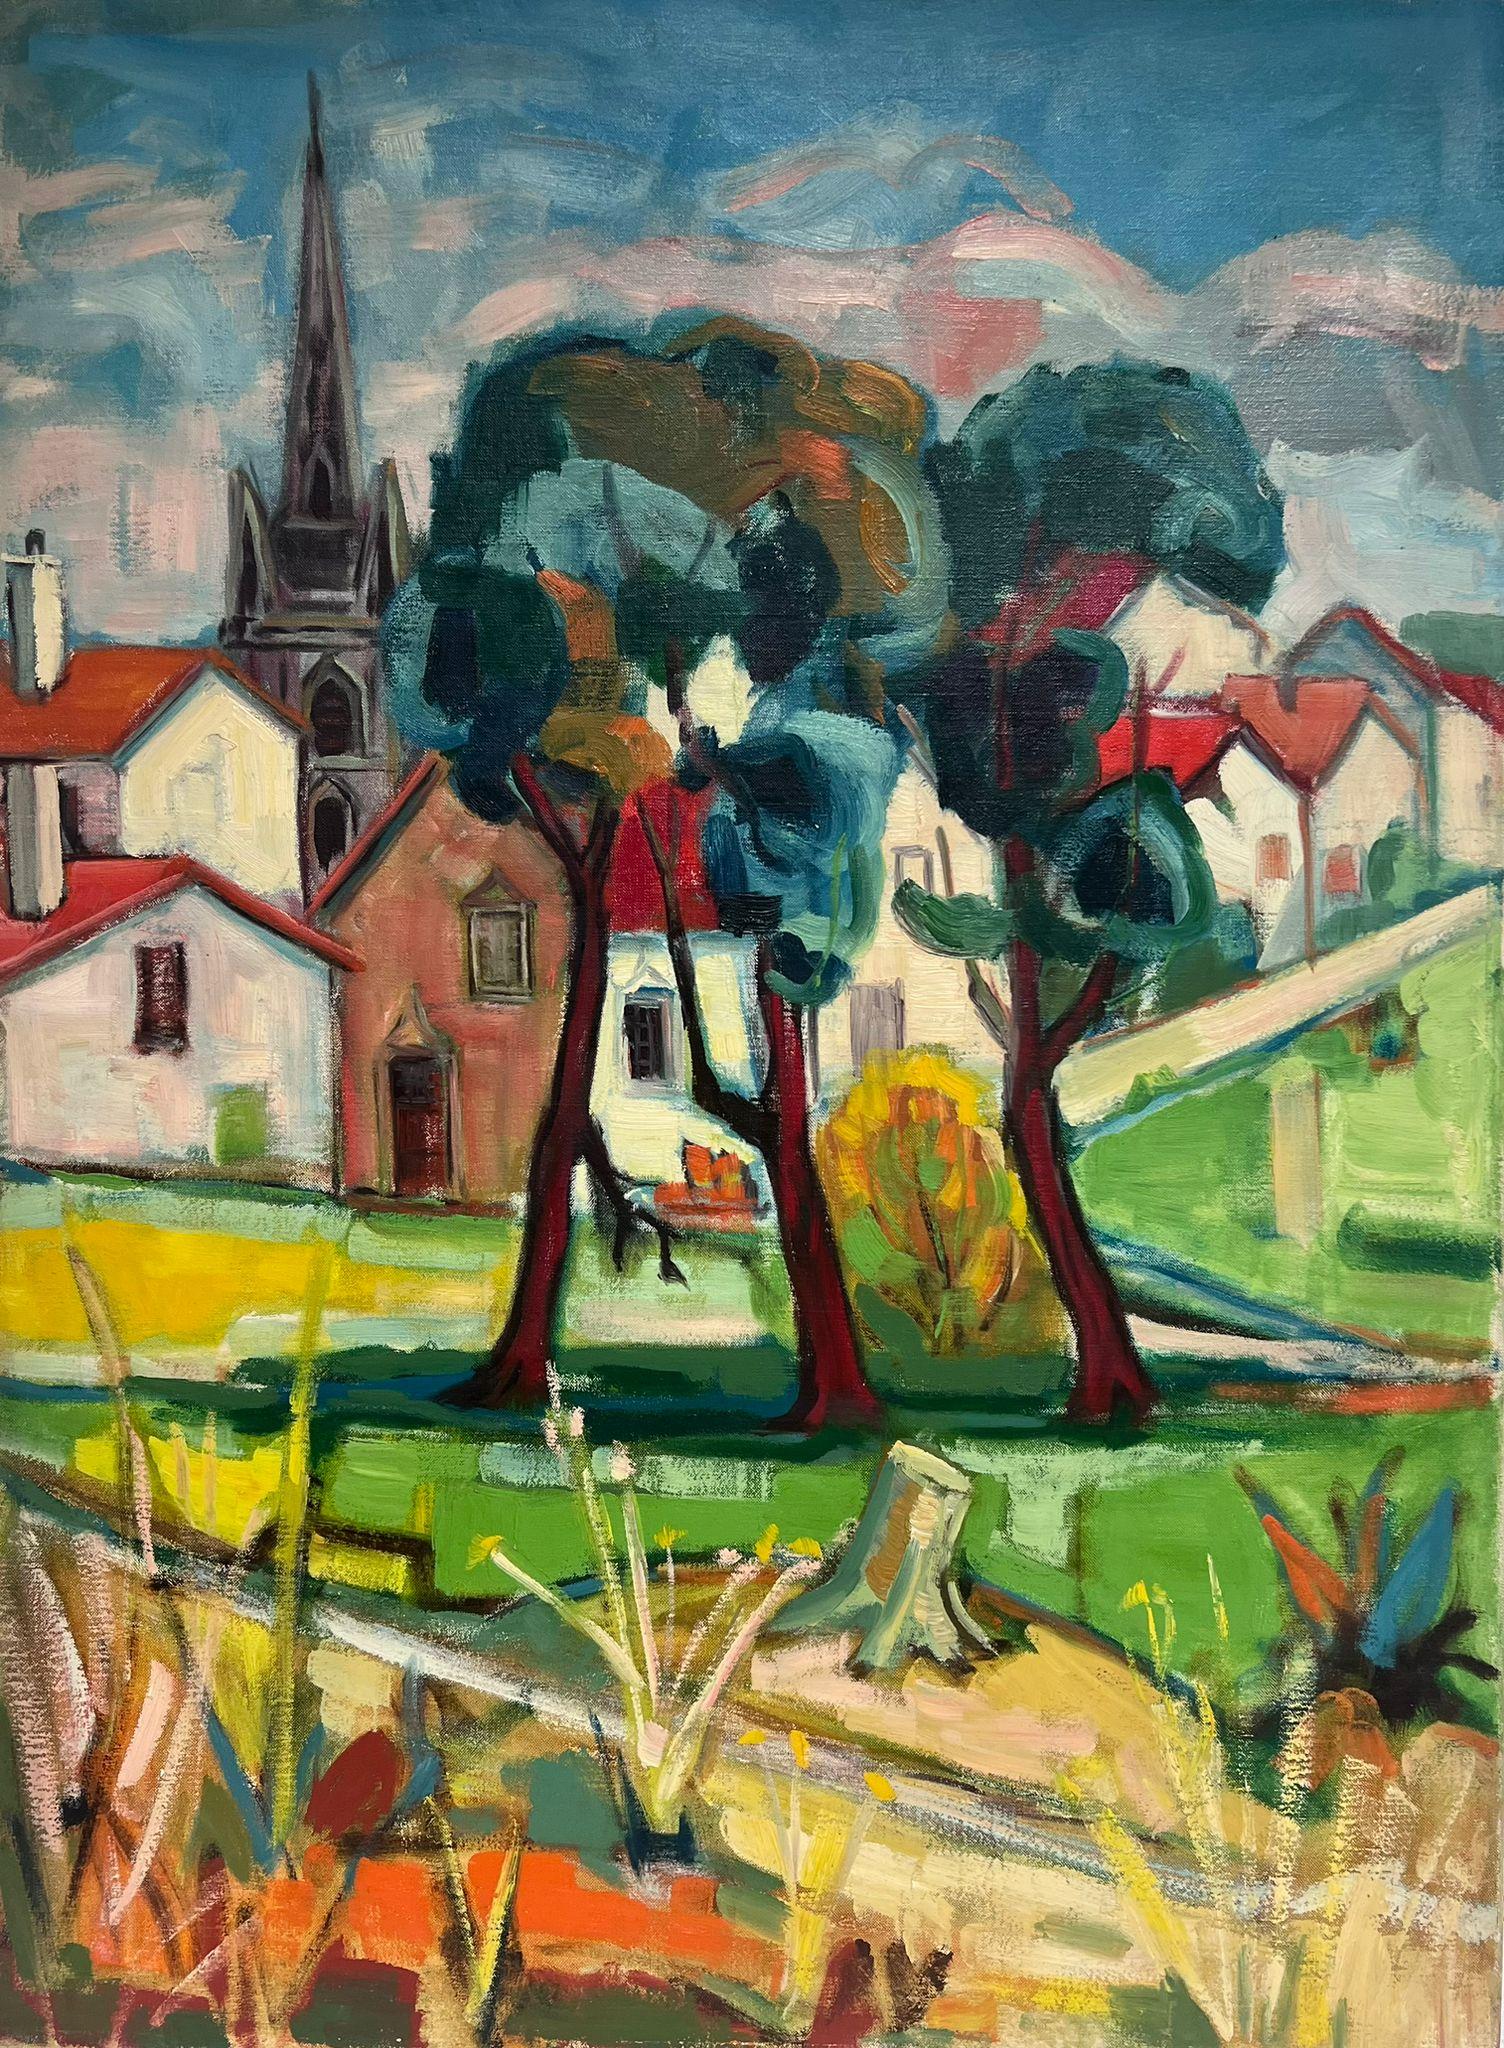  1960's French Modernist Cubist Oil Painting View of an Old French Town